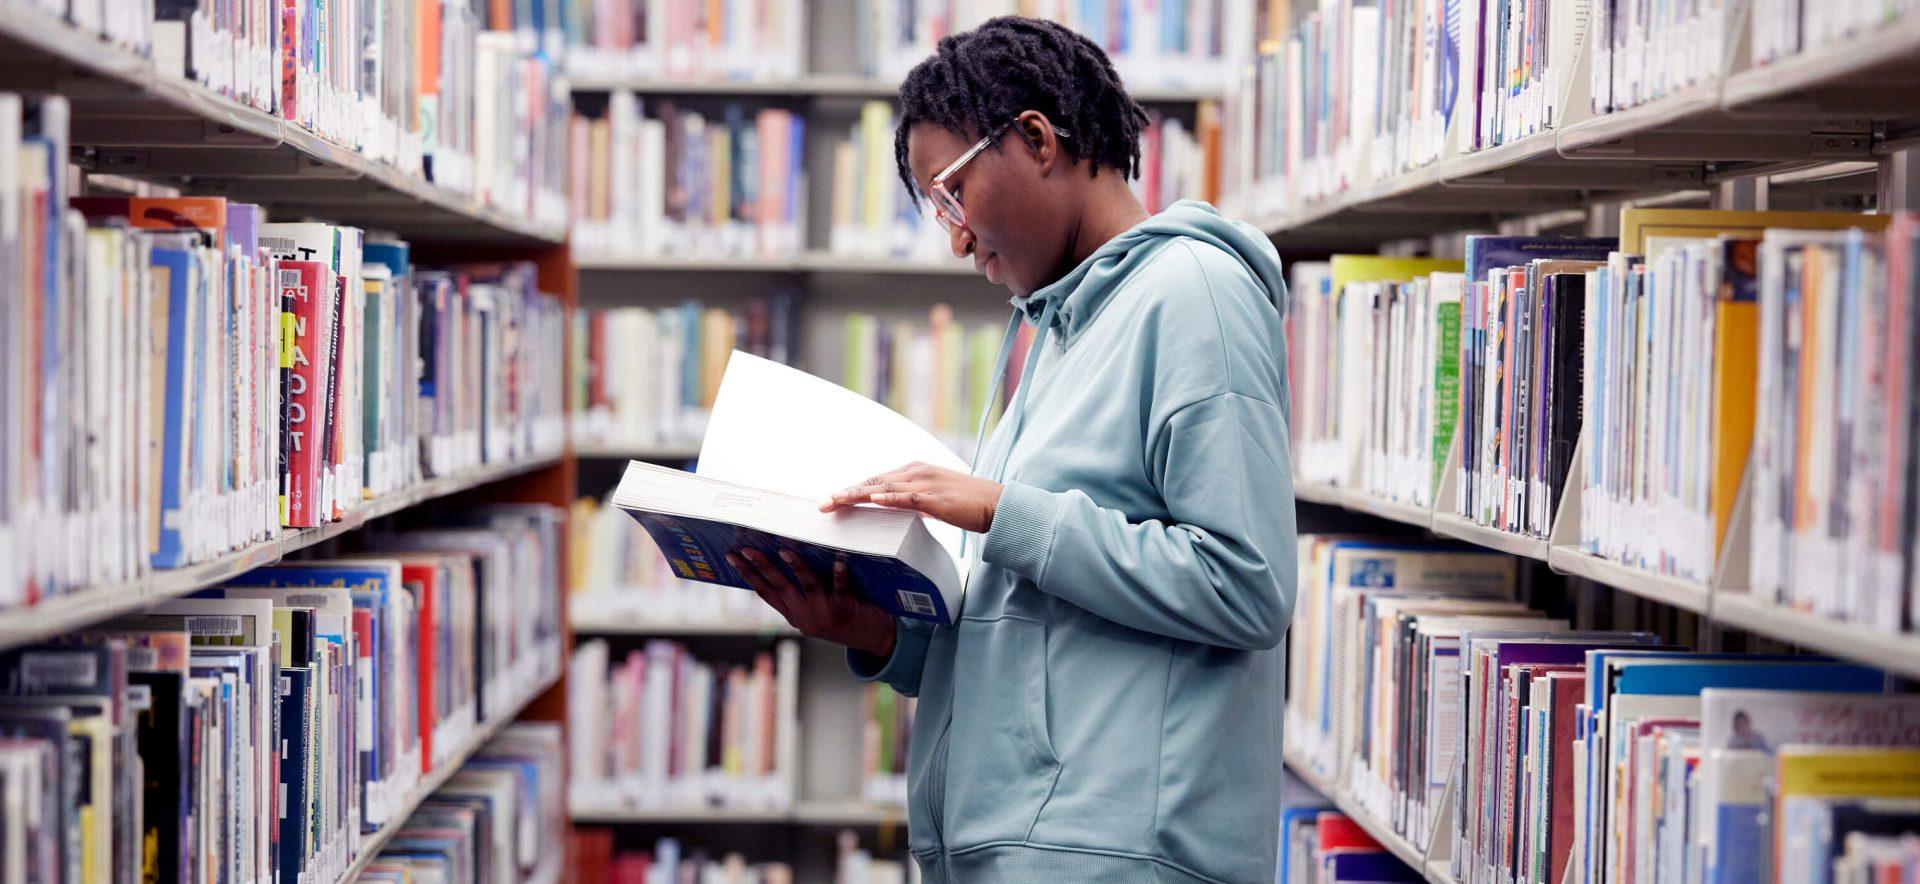 A student in the library looking at a book.